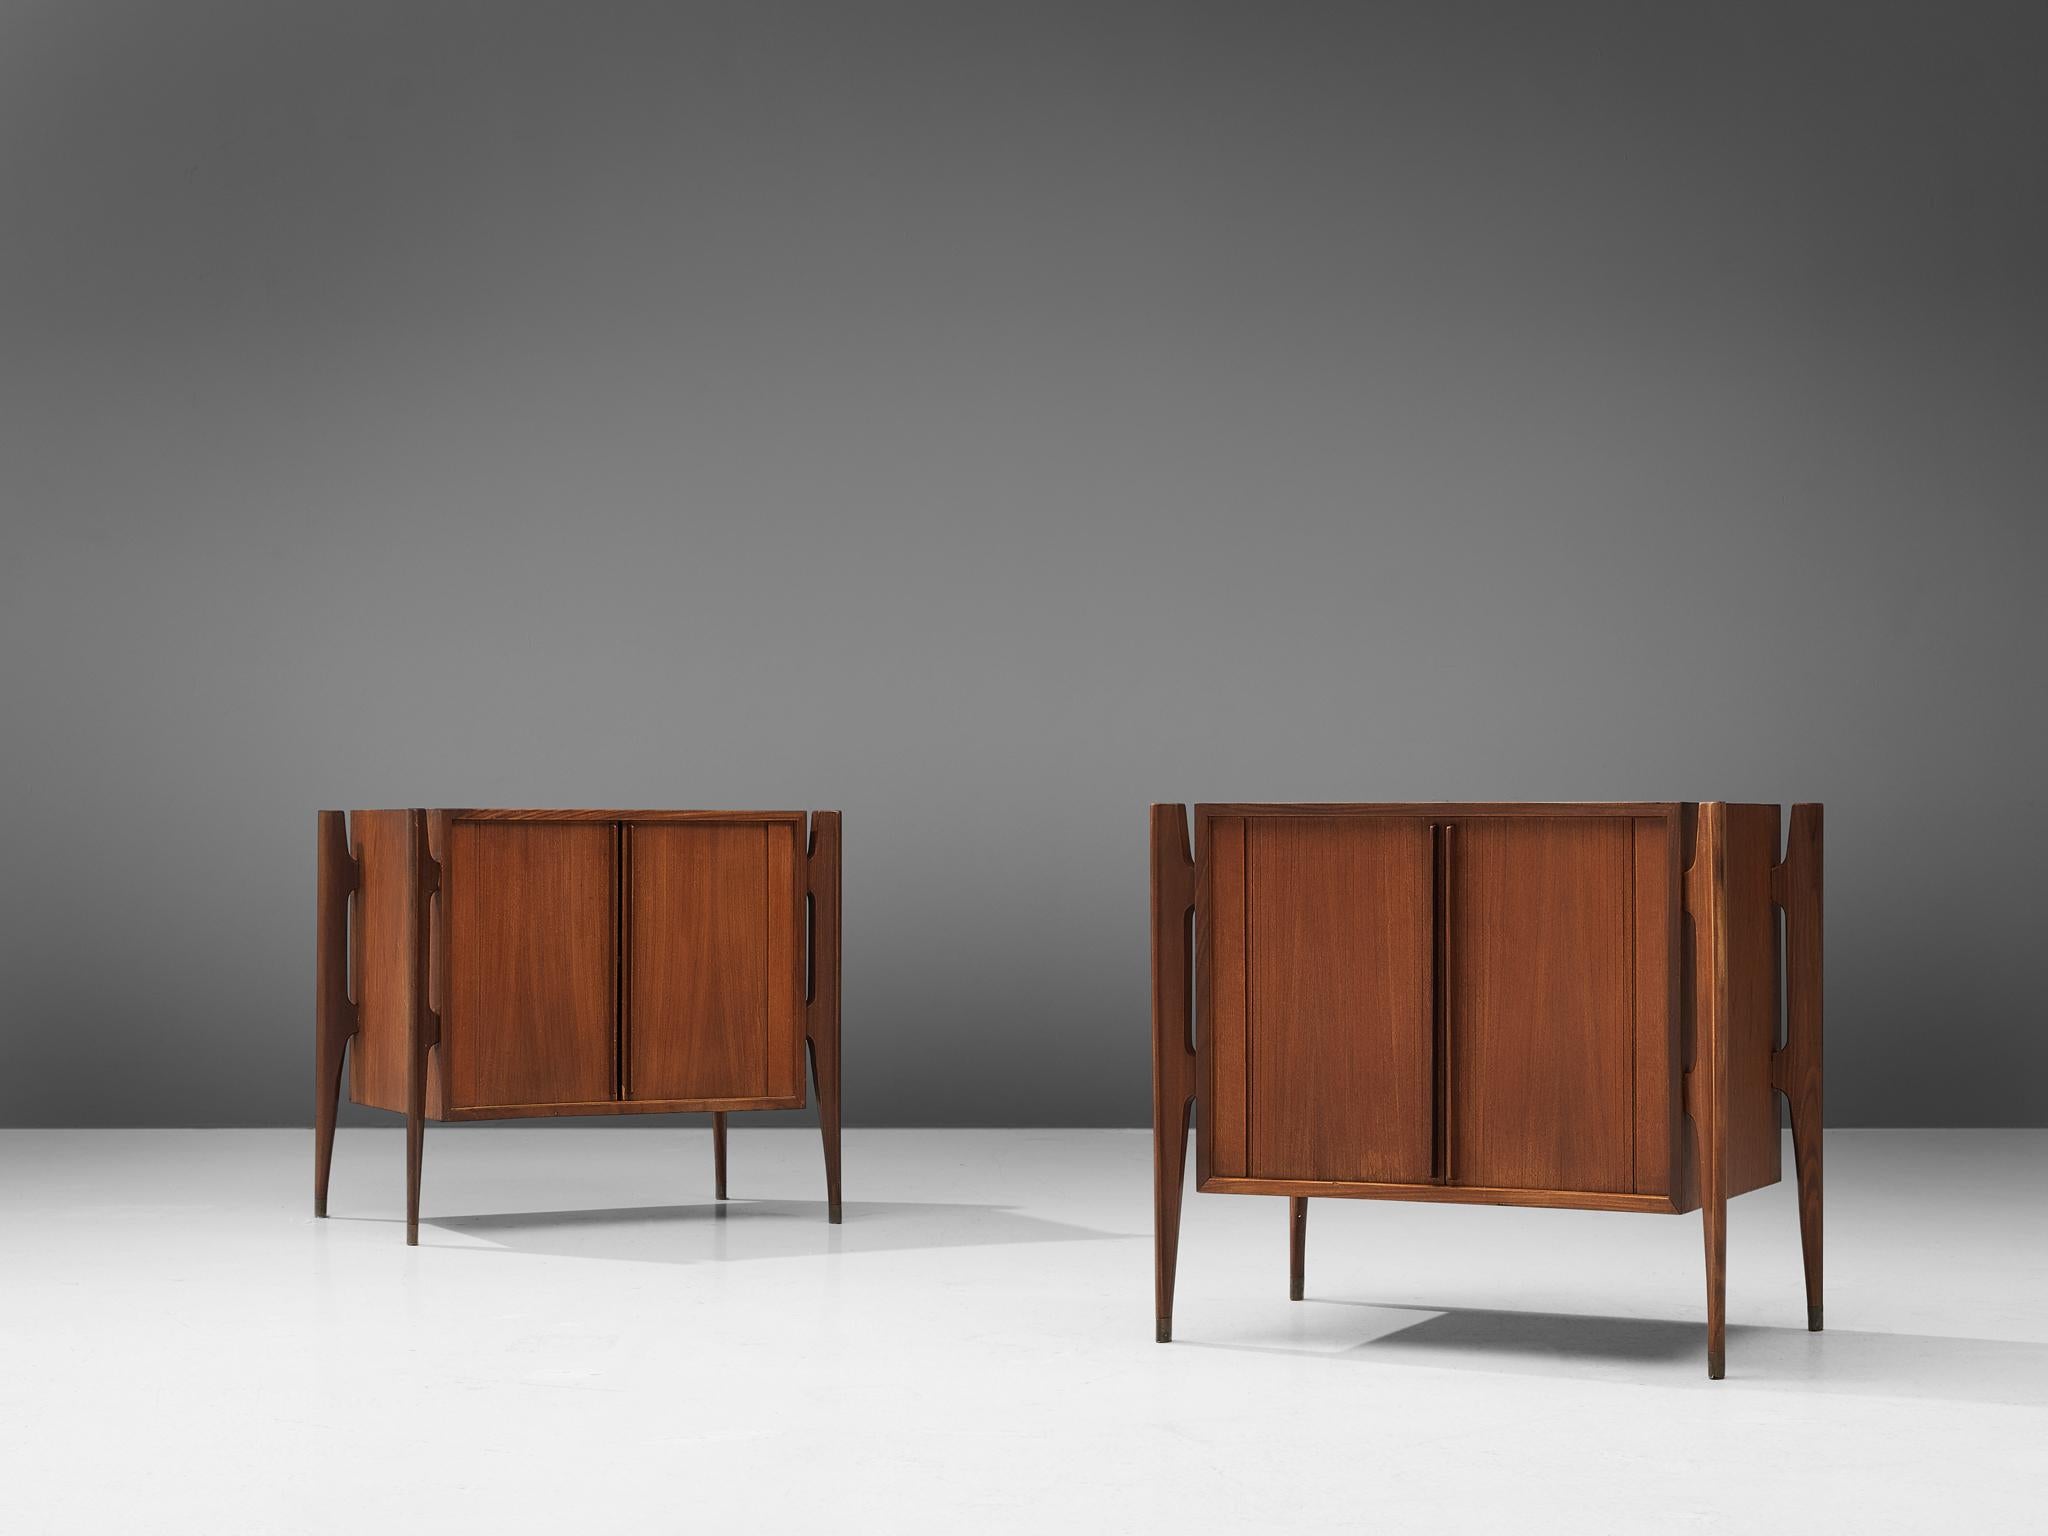 Morgen Clausen dor Brande Modelfabrik, pair of nightstands, teak, Denmark, circa 1960.

A pair of well-crafted nightstands designed by the Dane Jorgen Clausen for Brande Mobelfabrik. The small cabinets are expected in teak and consists of a small